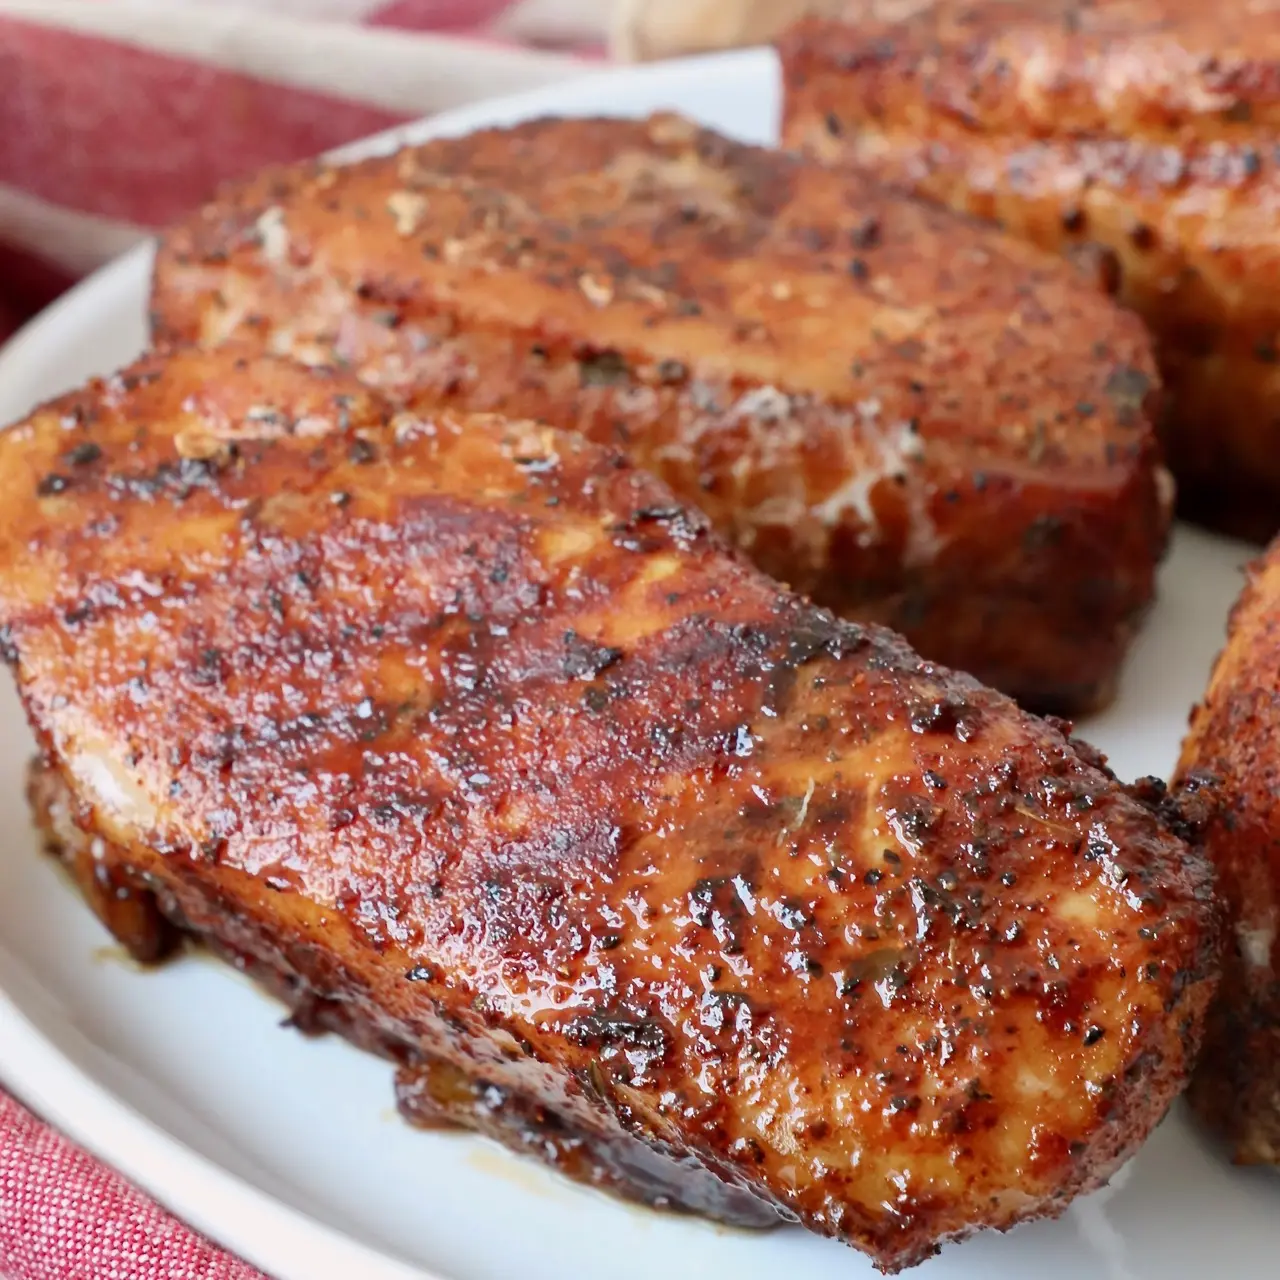 how to cook smoked pork chops in the oven - How do you heat up fully cooked smoked pork chops